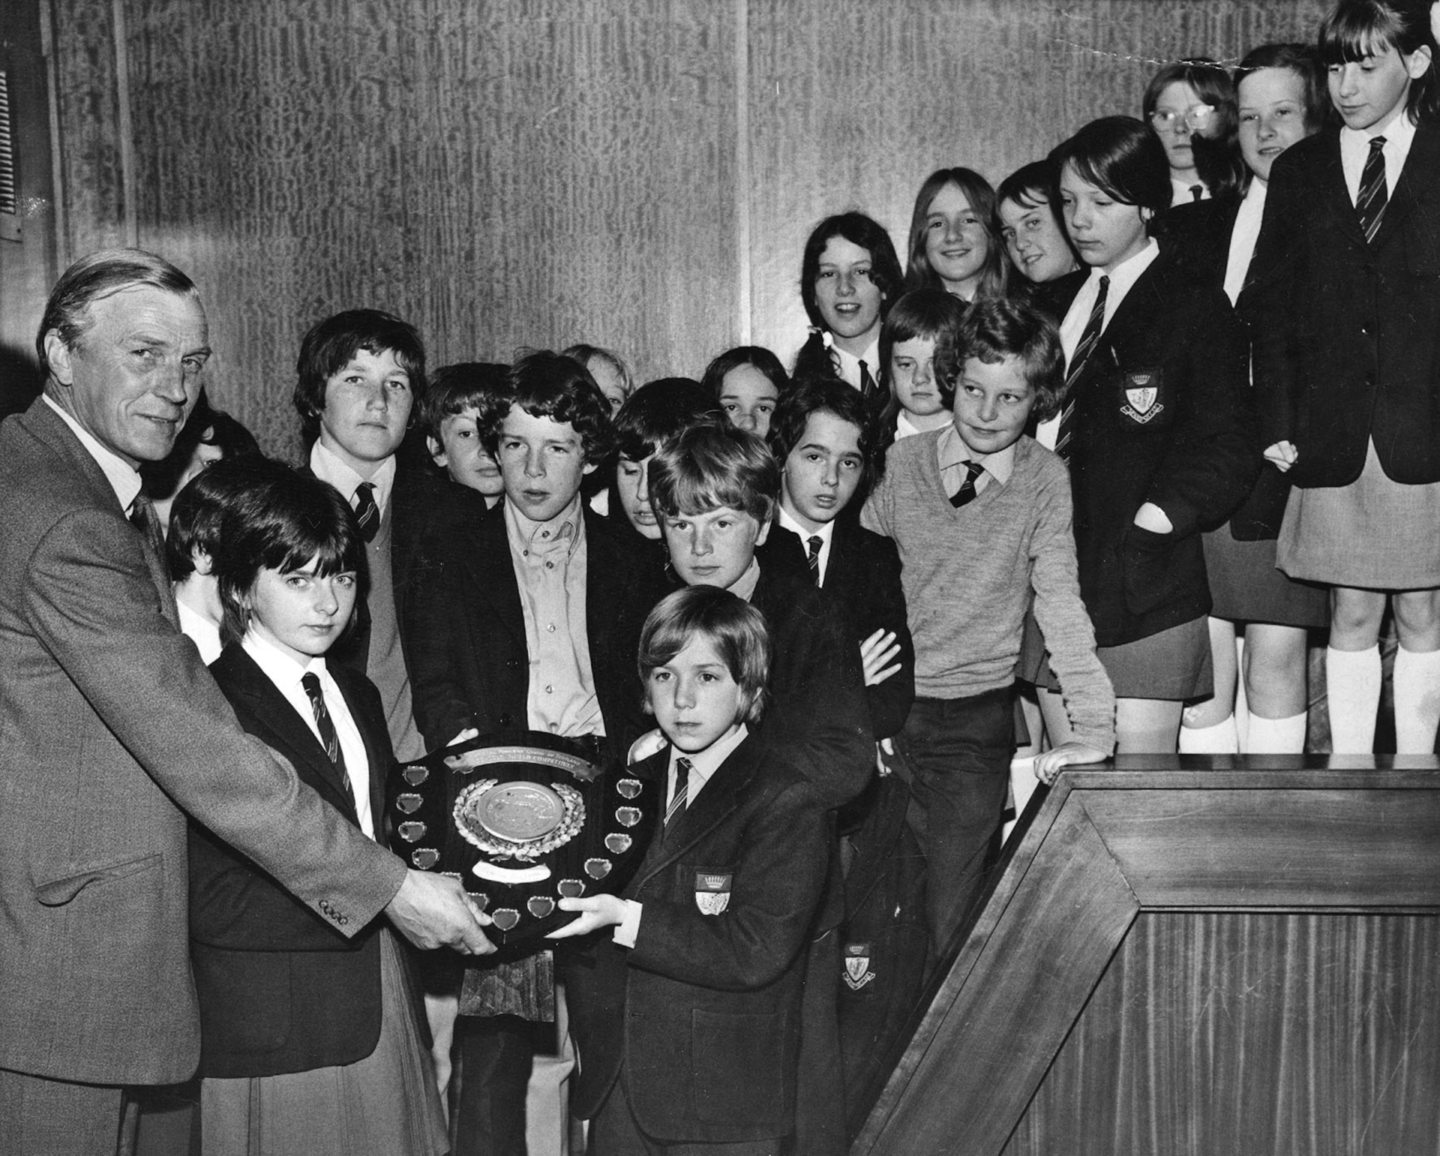 President of the Scottish Farmers' Union, D Morgan Milne, presented the Senior Award in the SFU Farms Competition Shield to Nadia Ross and Ronald Stewart on behalf of Class 1F at Summerhill Academy, Aberdeen, in this picture from July 1971.